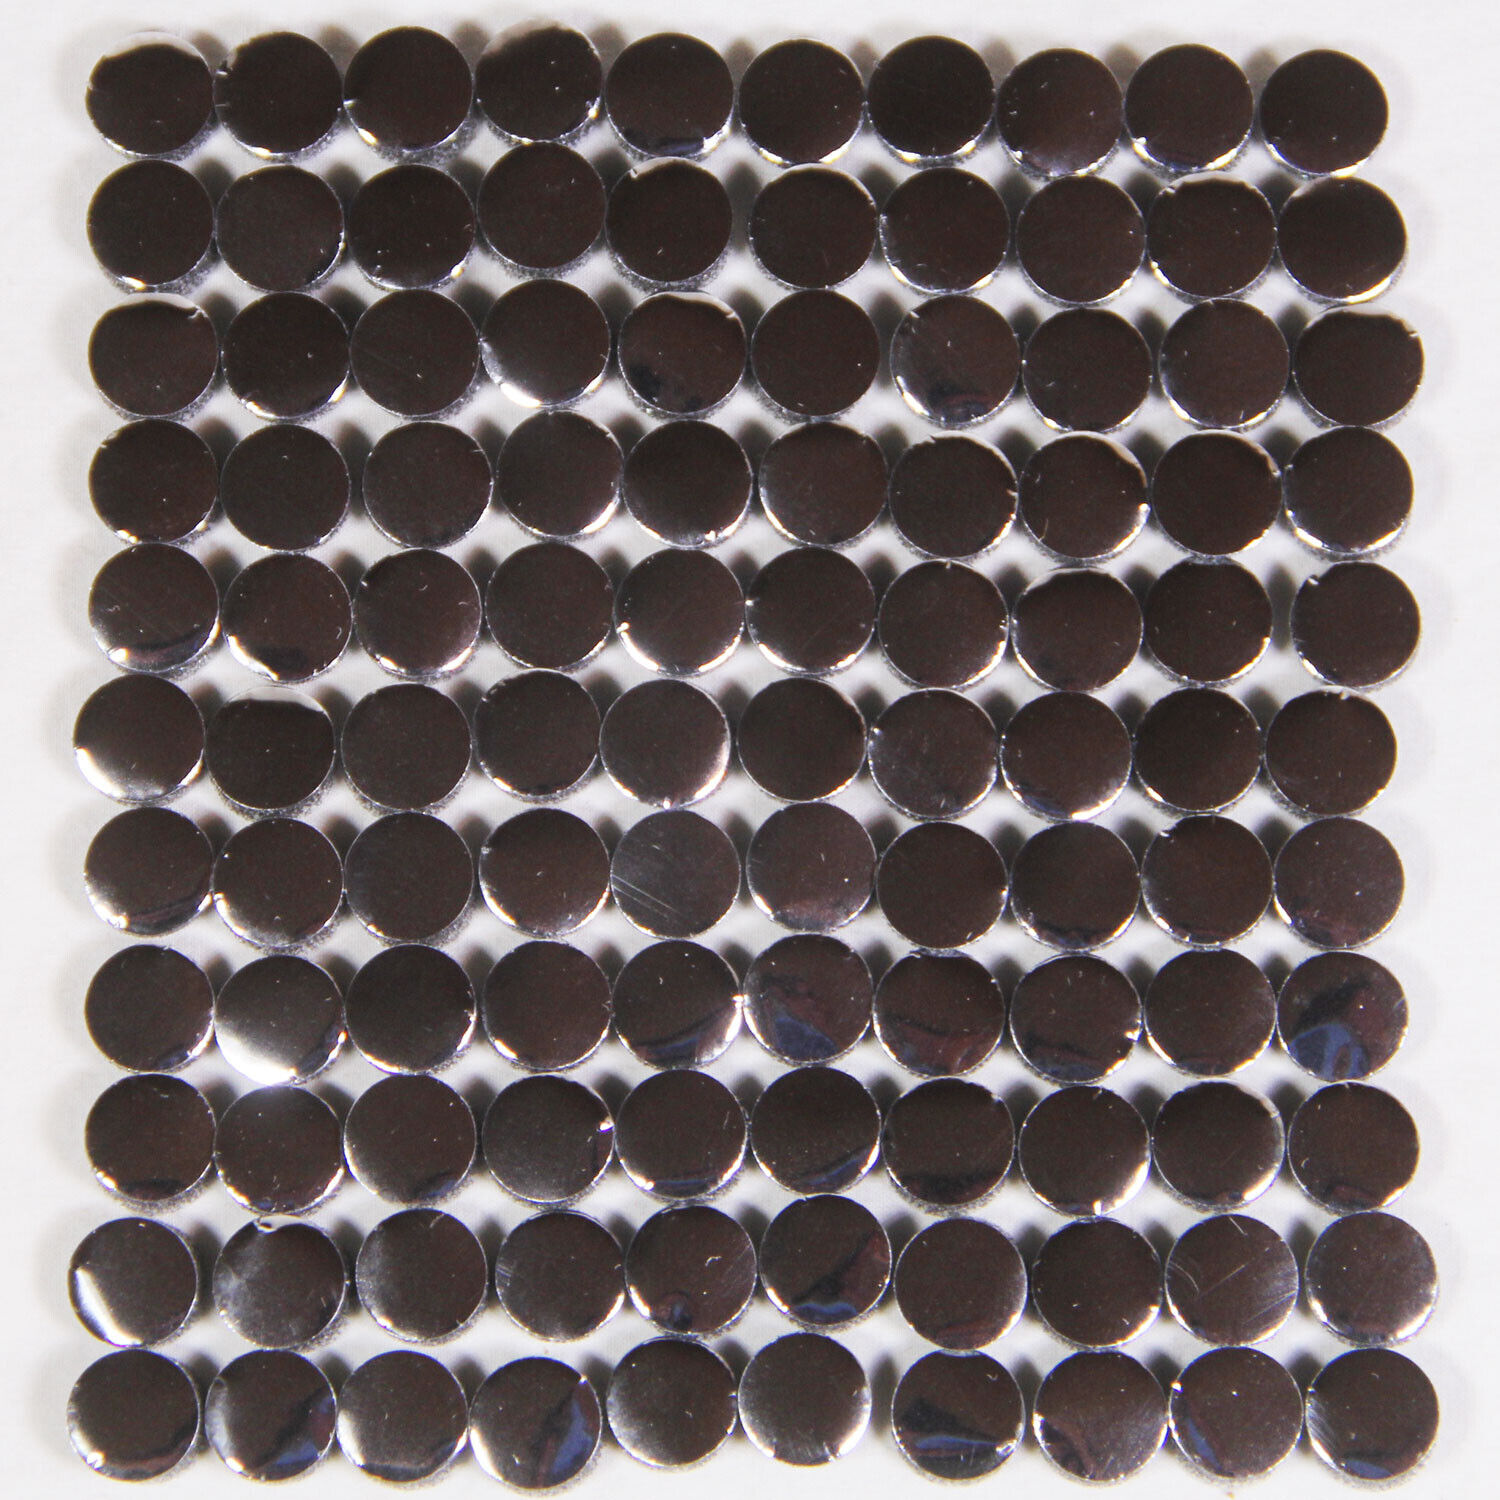 105 Foam and Foil Capacitive Pads for KeyTronic & BTC Keyboard Repair by TexElec